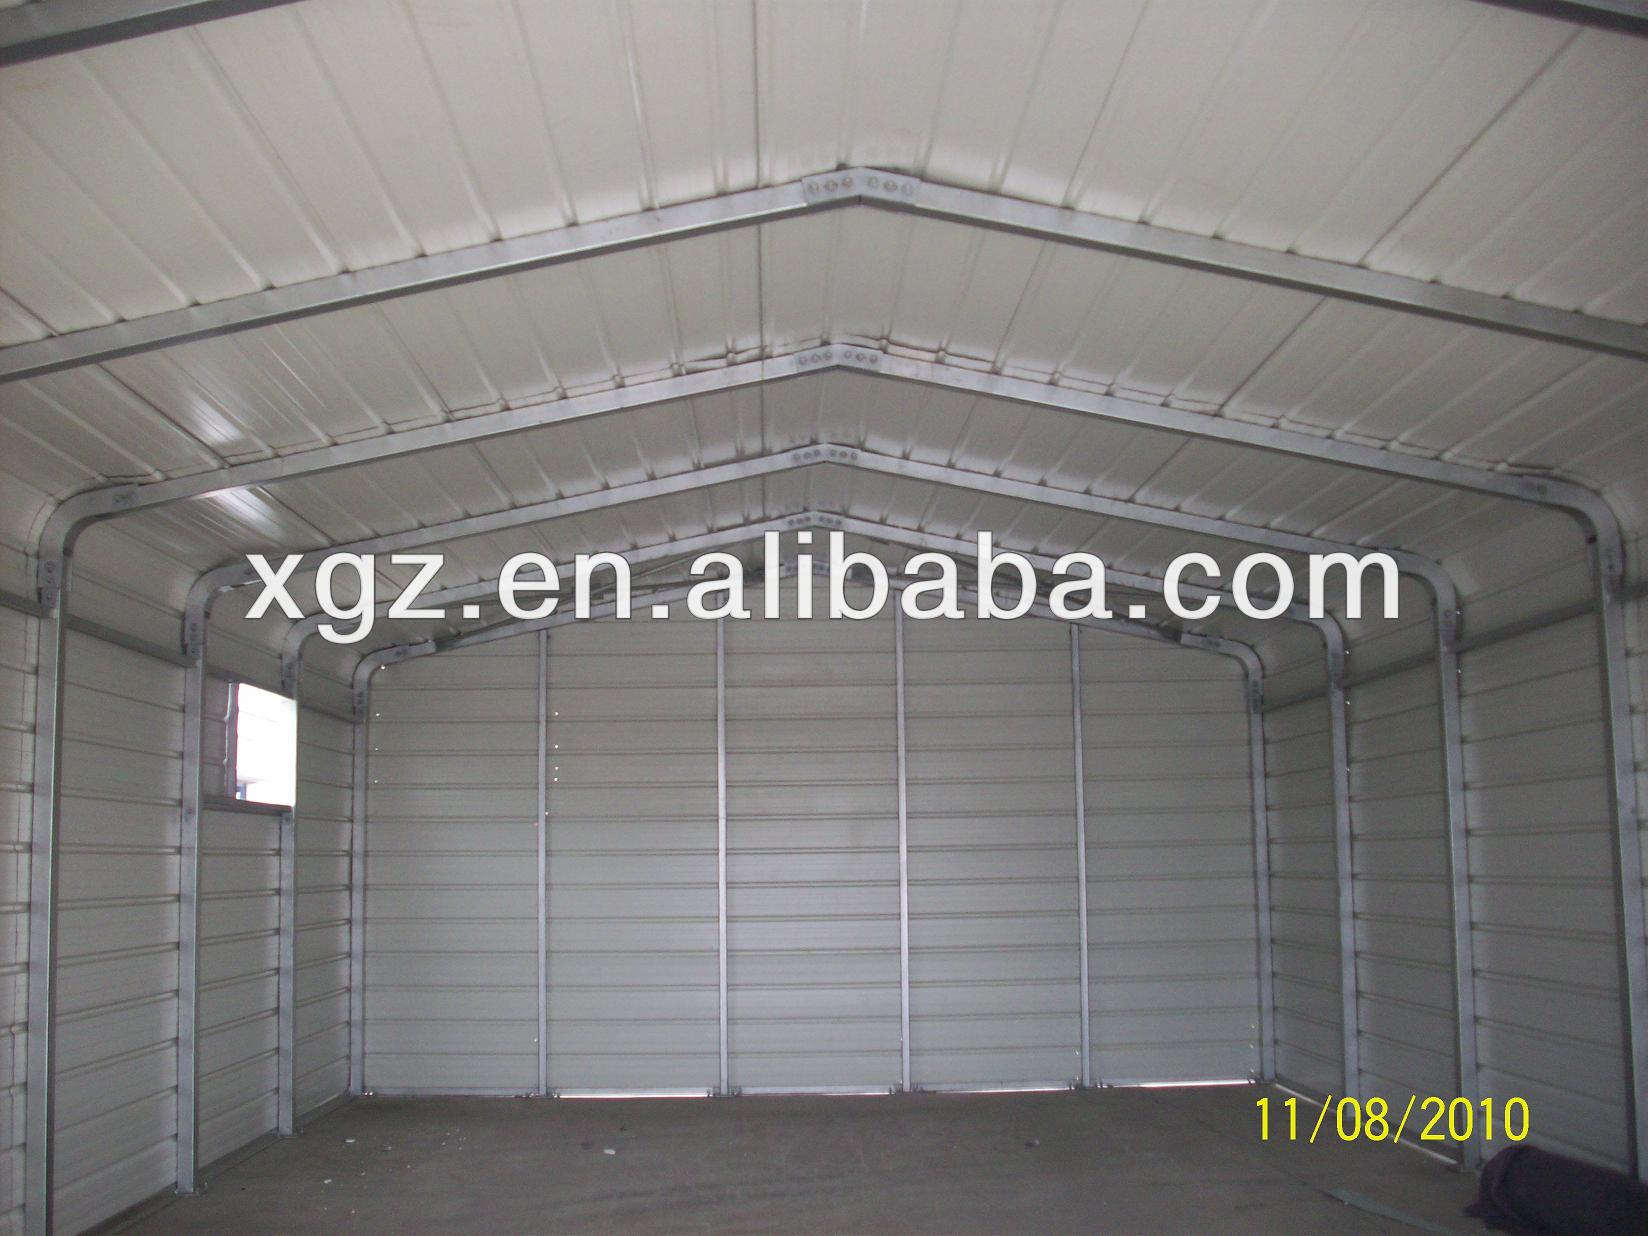 XGZ Prefab Steel Structure cheap carports FOR SALES